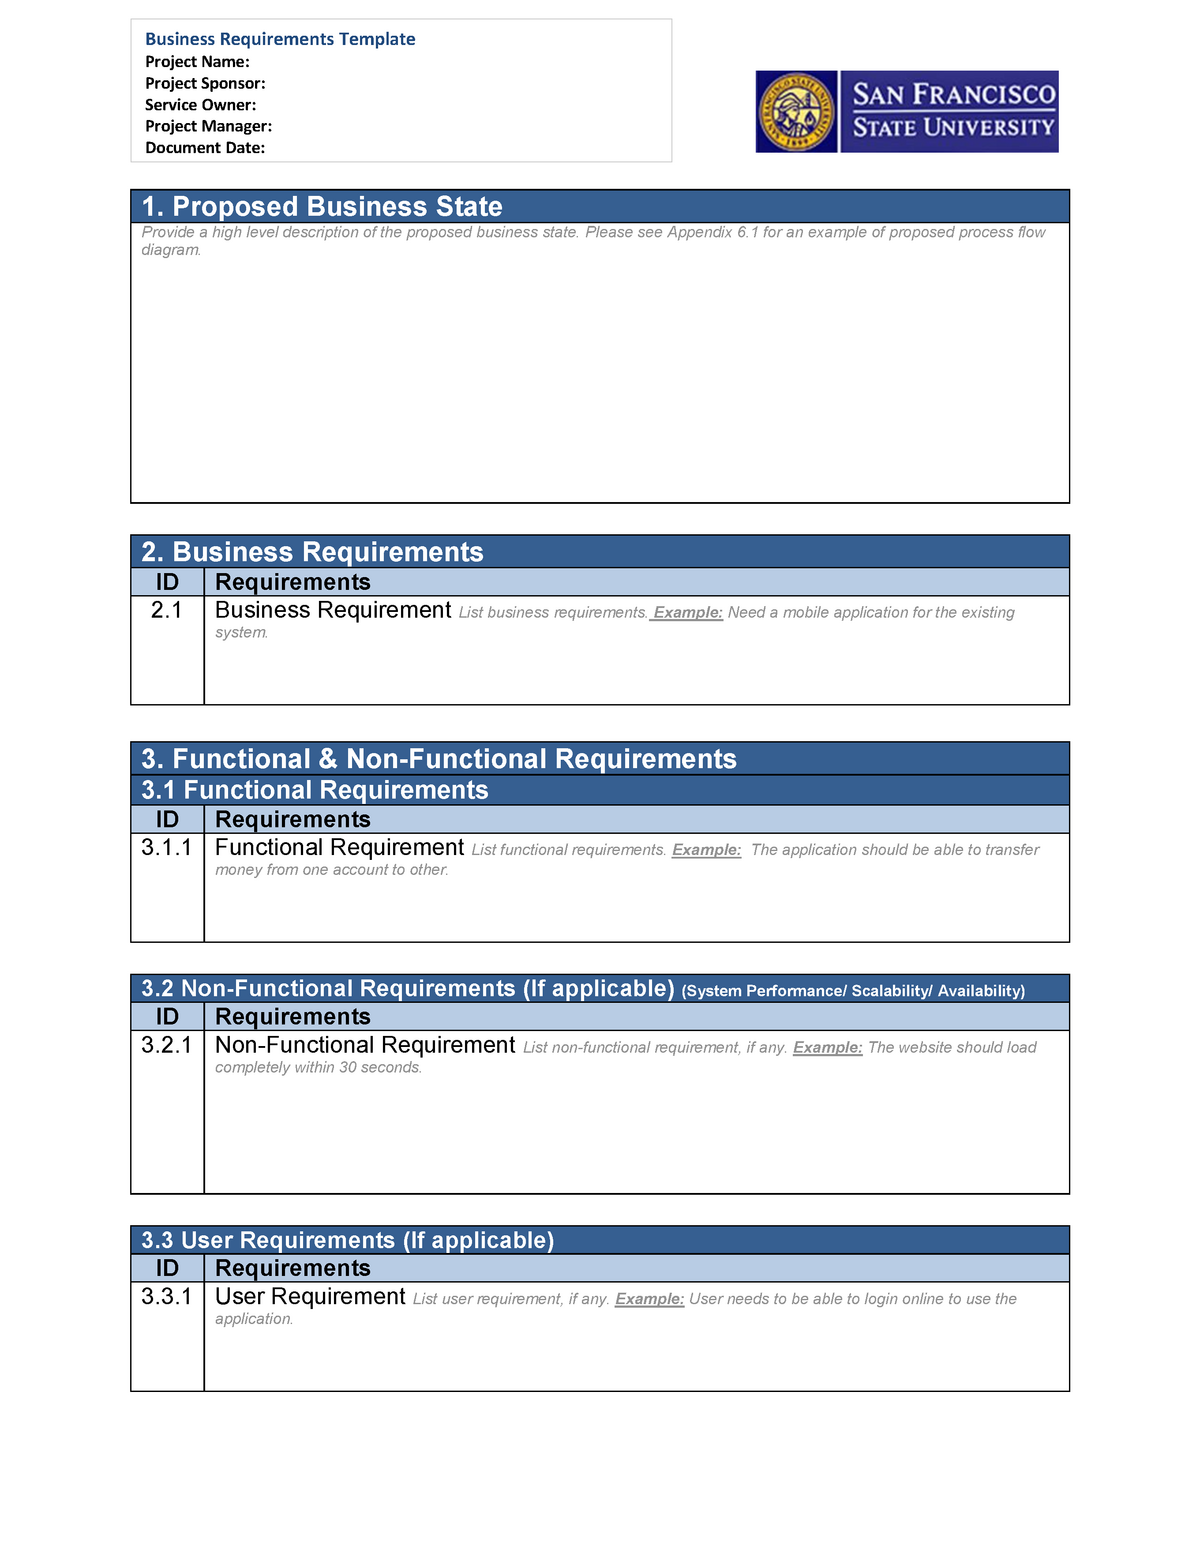 Sfsu business requirements template v22 - MBA - 2203 - SPPU - StuDocu With Example Business Requirements Document Template